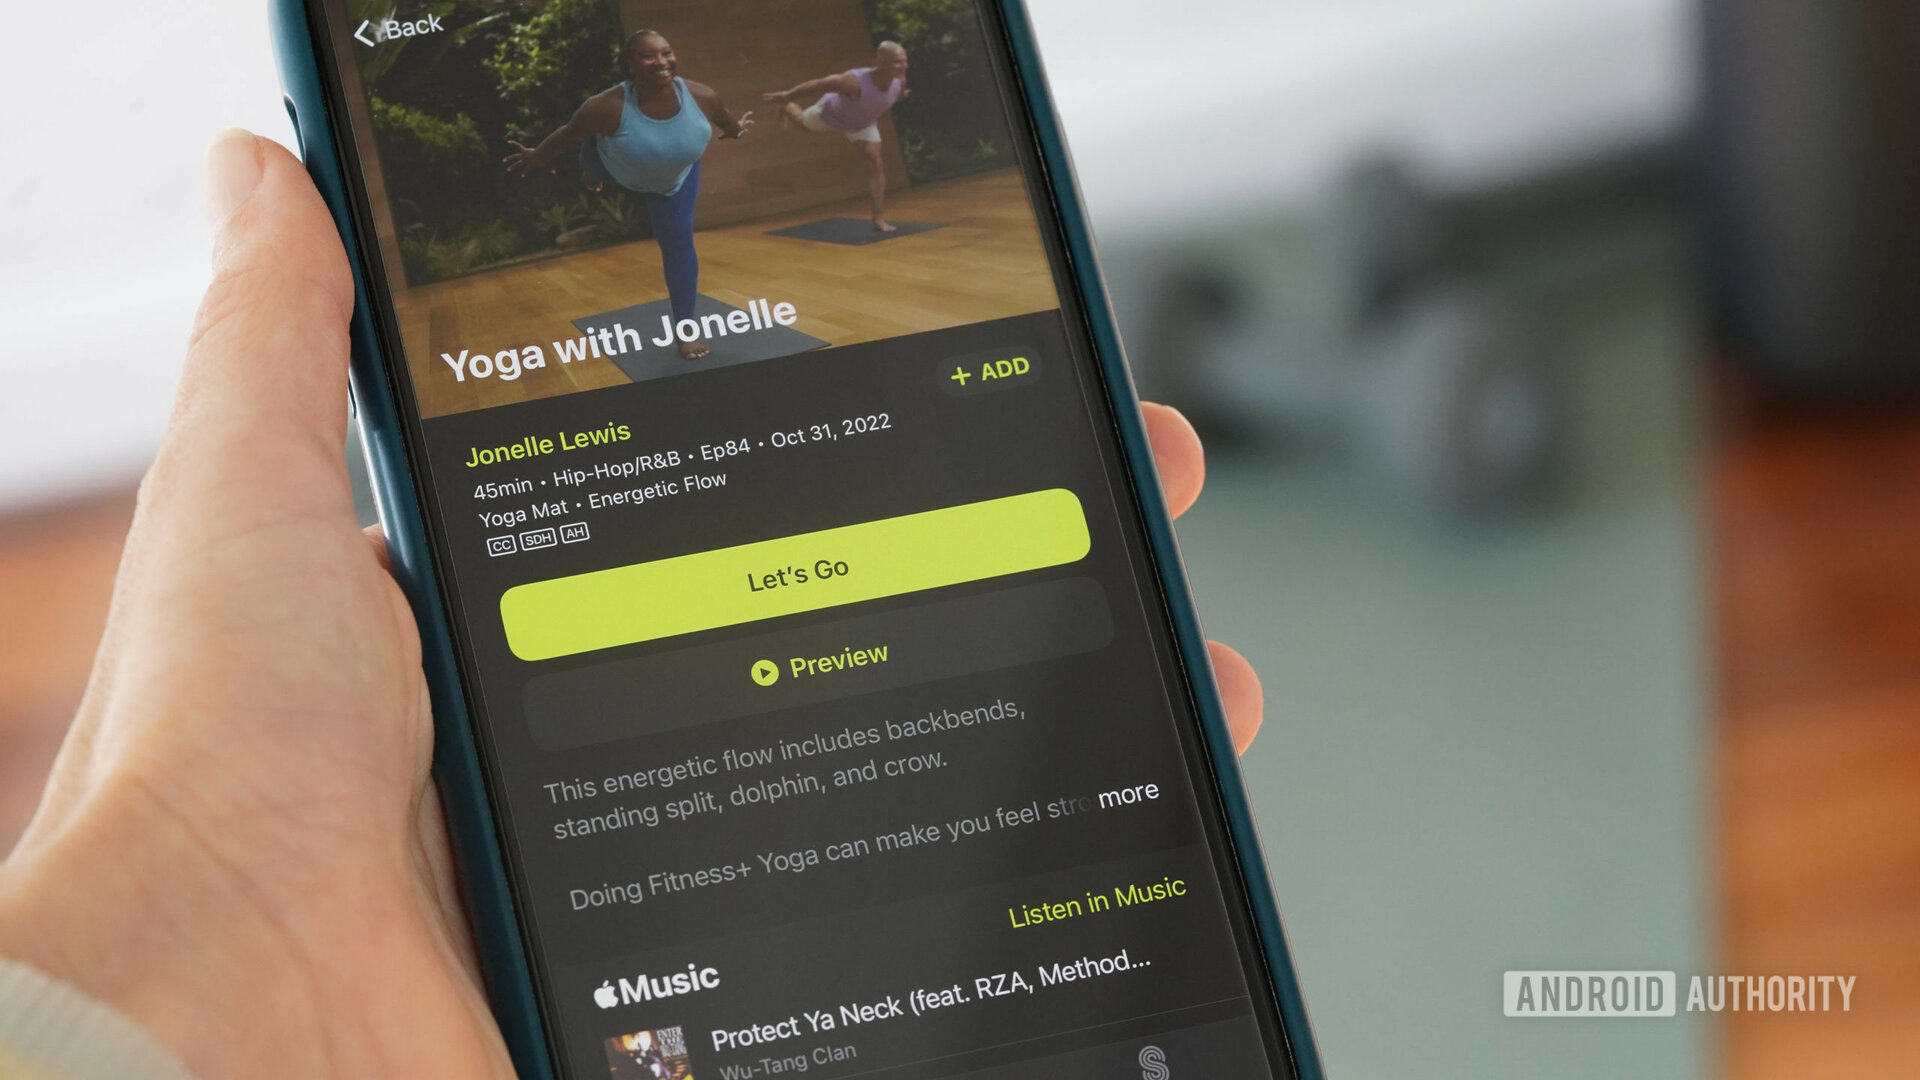 An iPhone user reviews the workout information for a Yoga class with Jonelle.